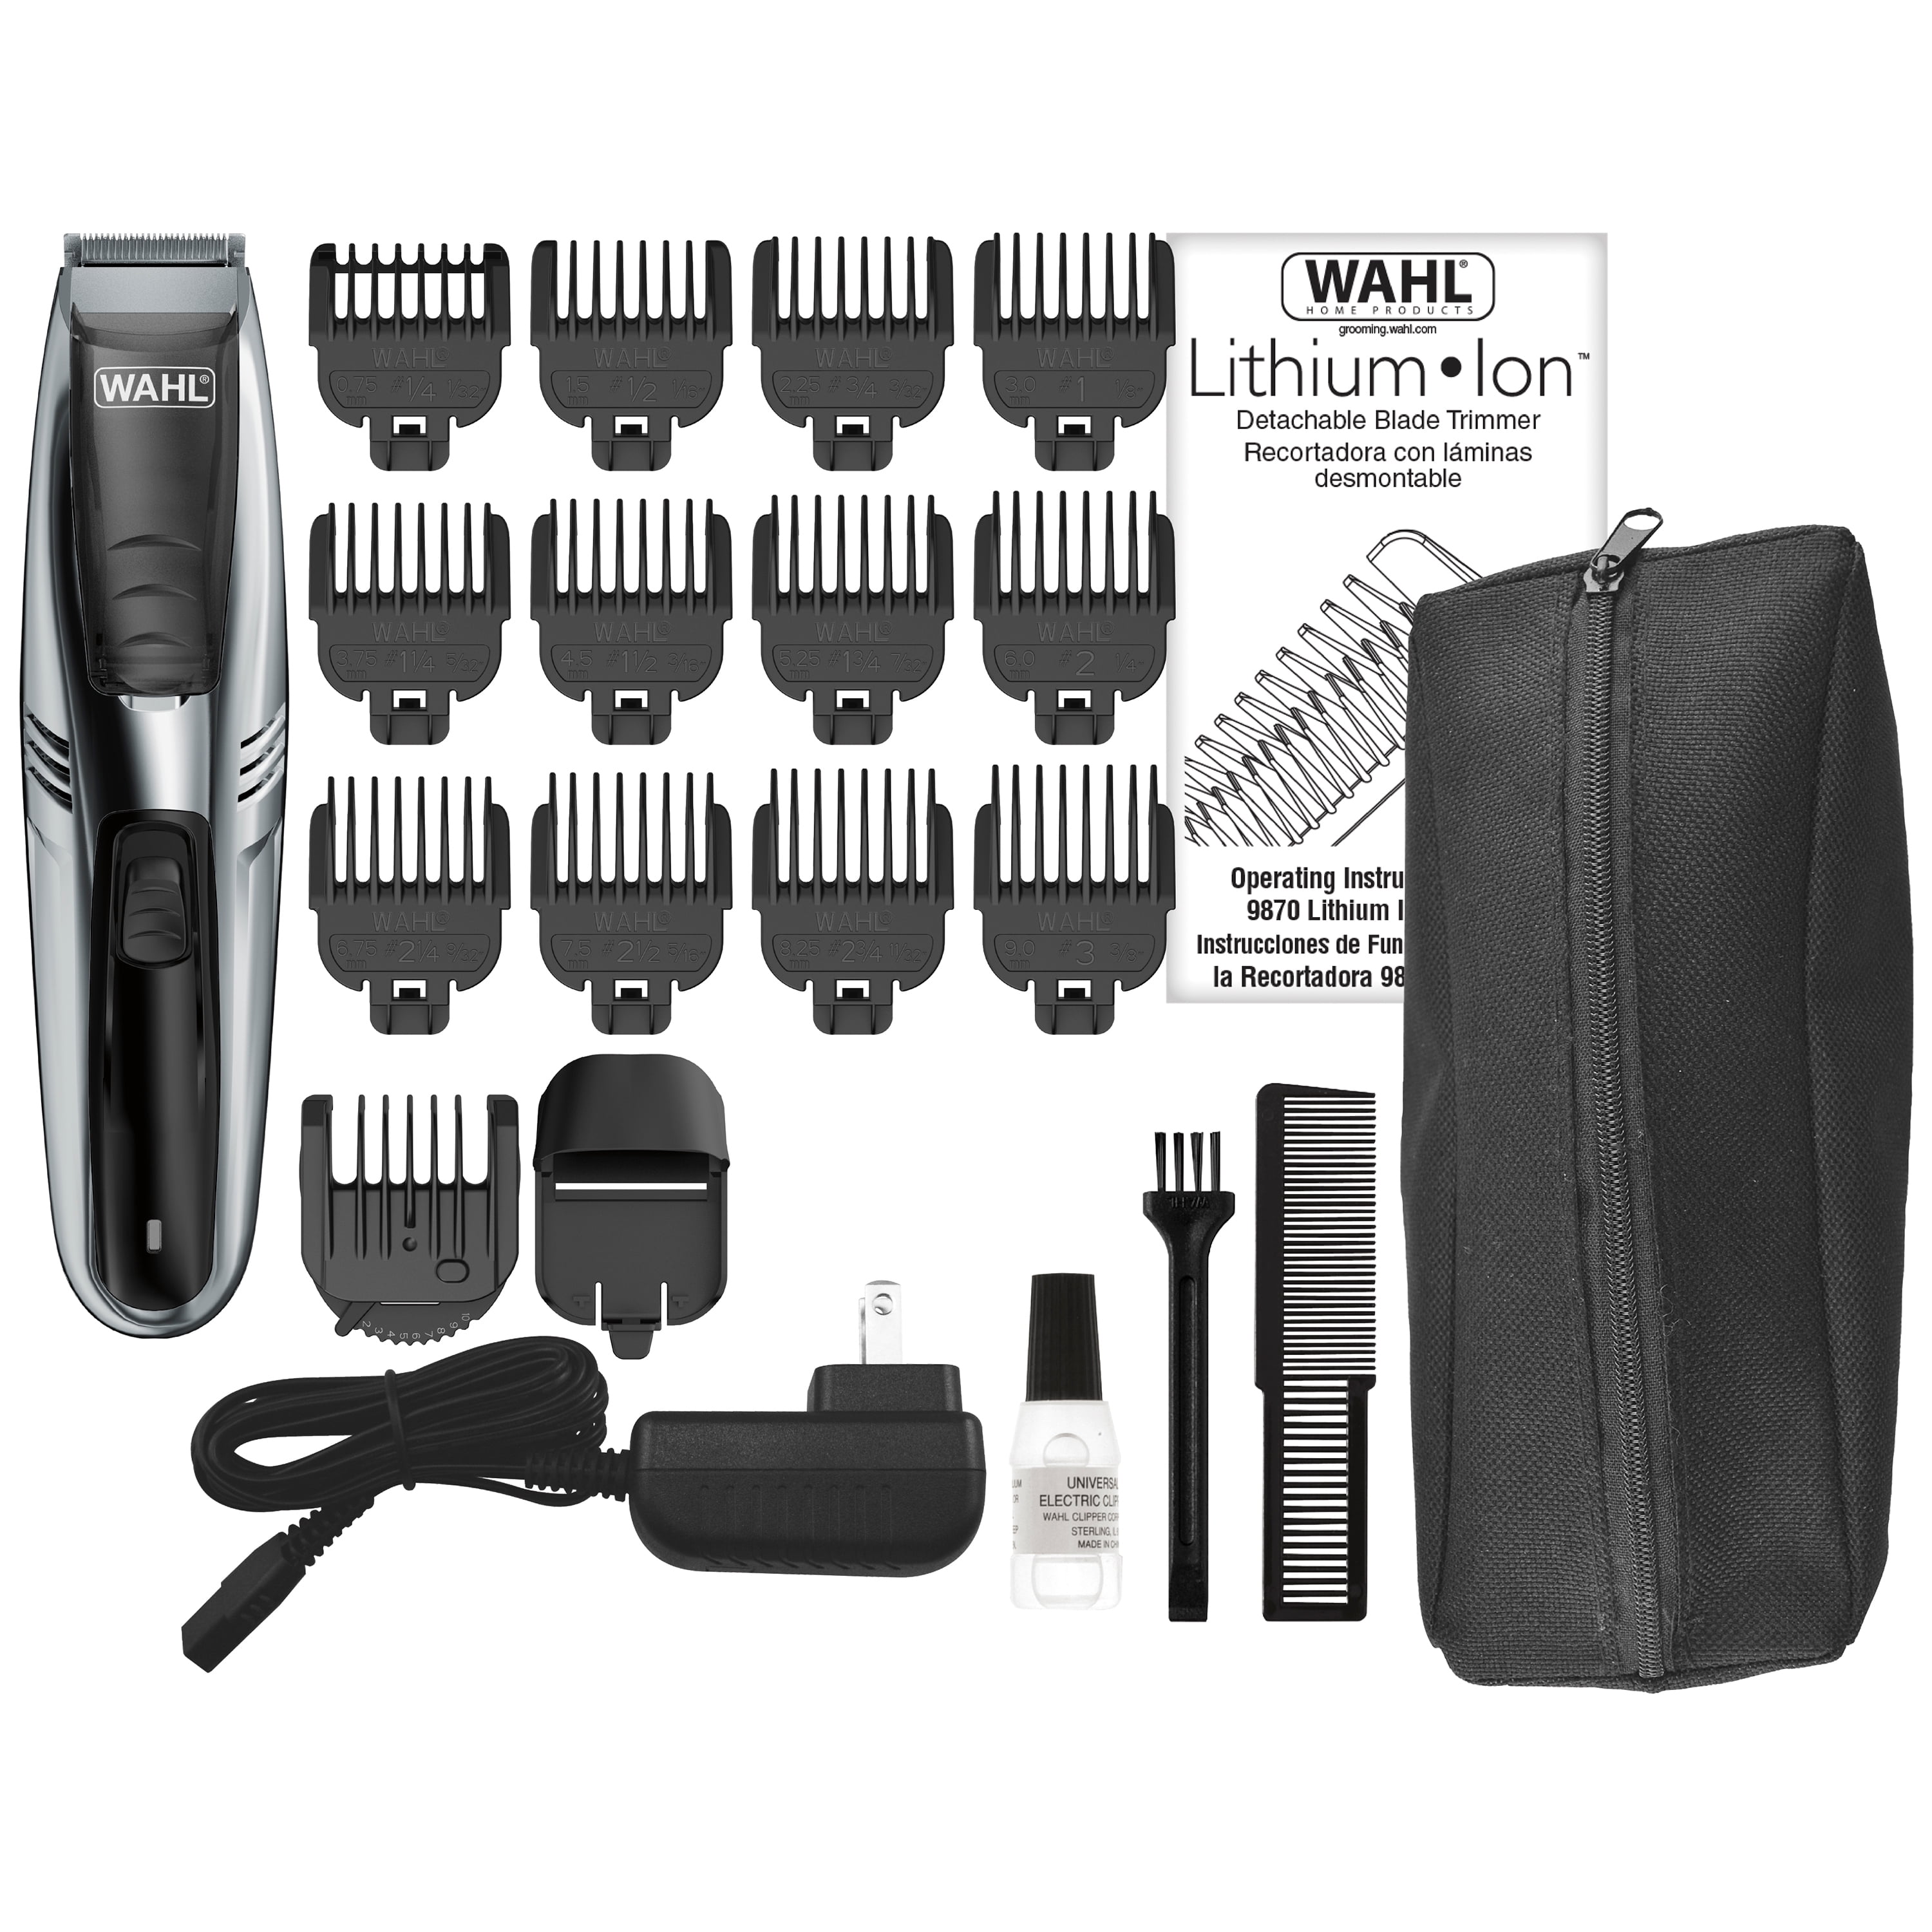 electric shaver with vacuum